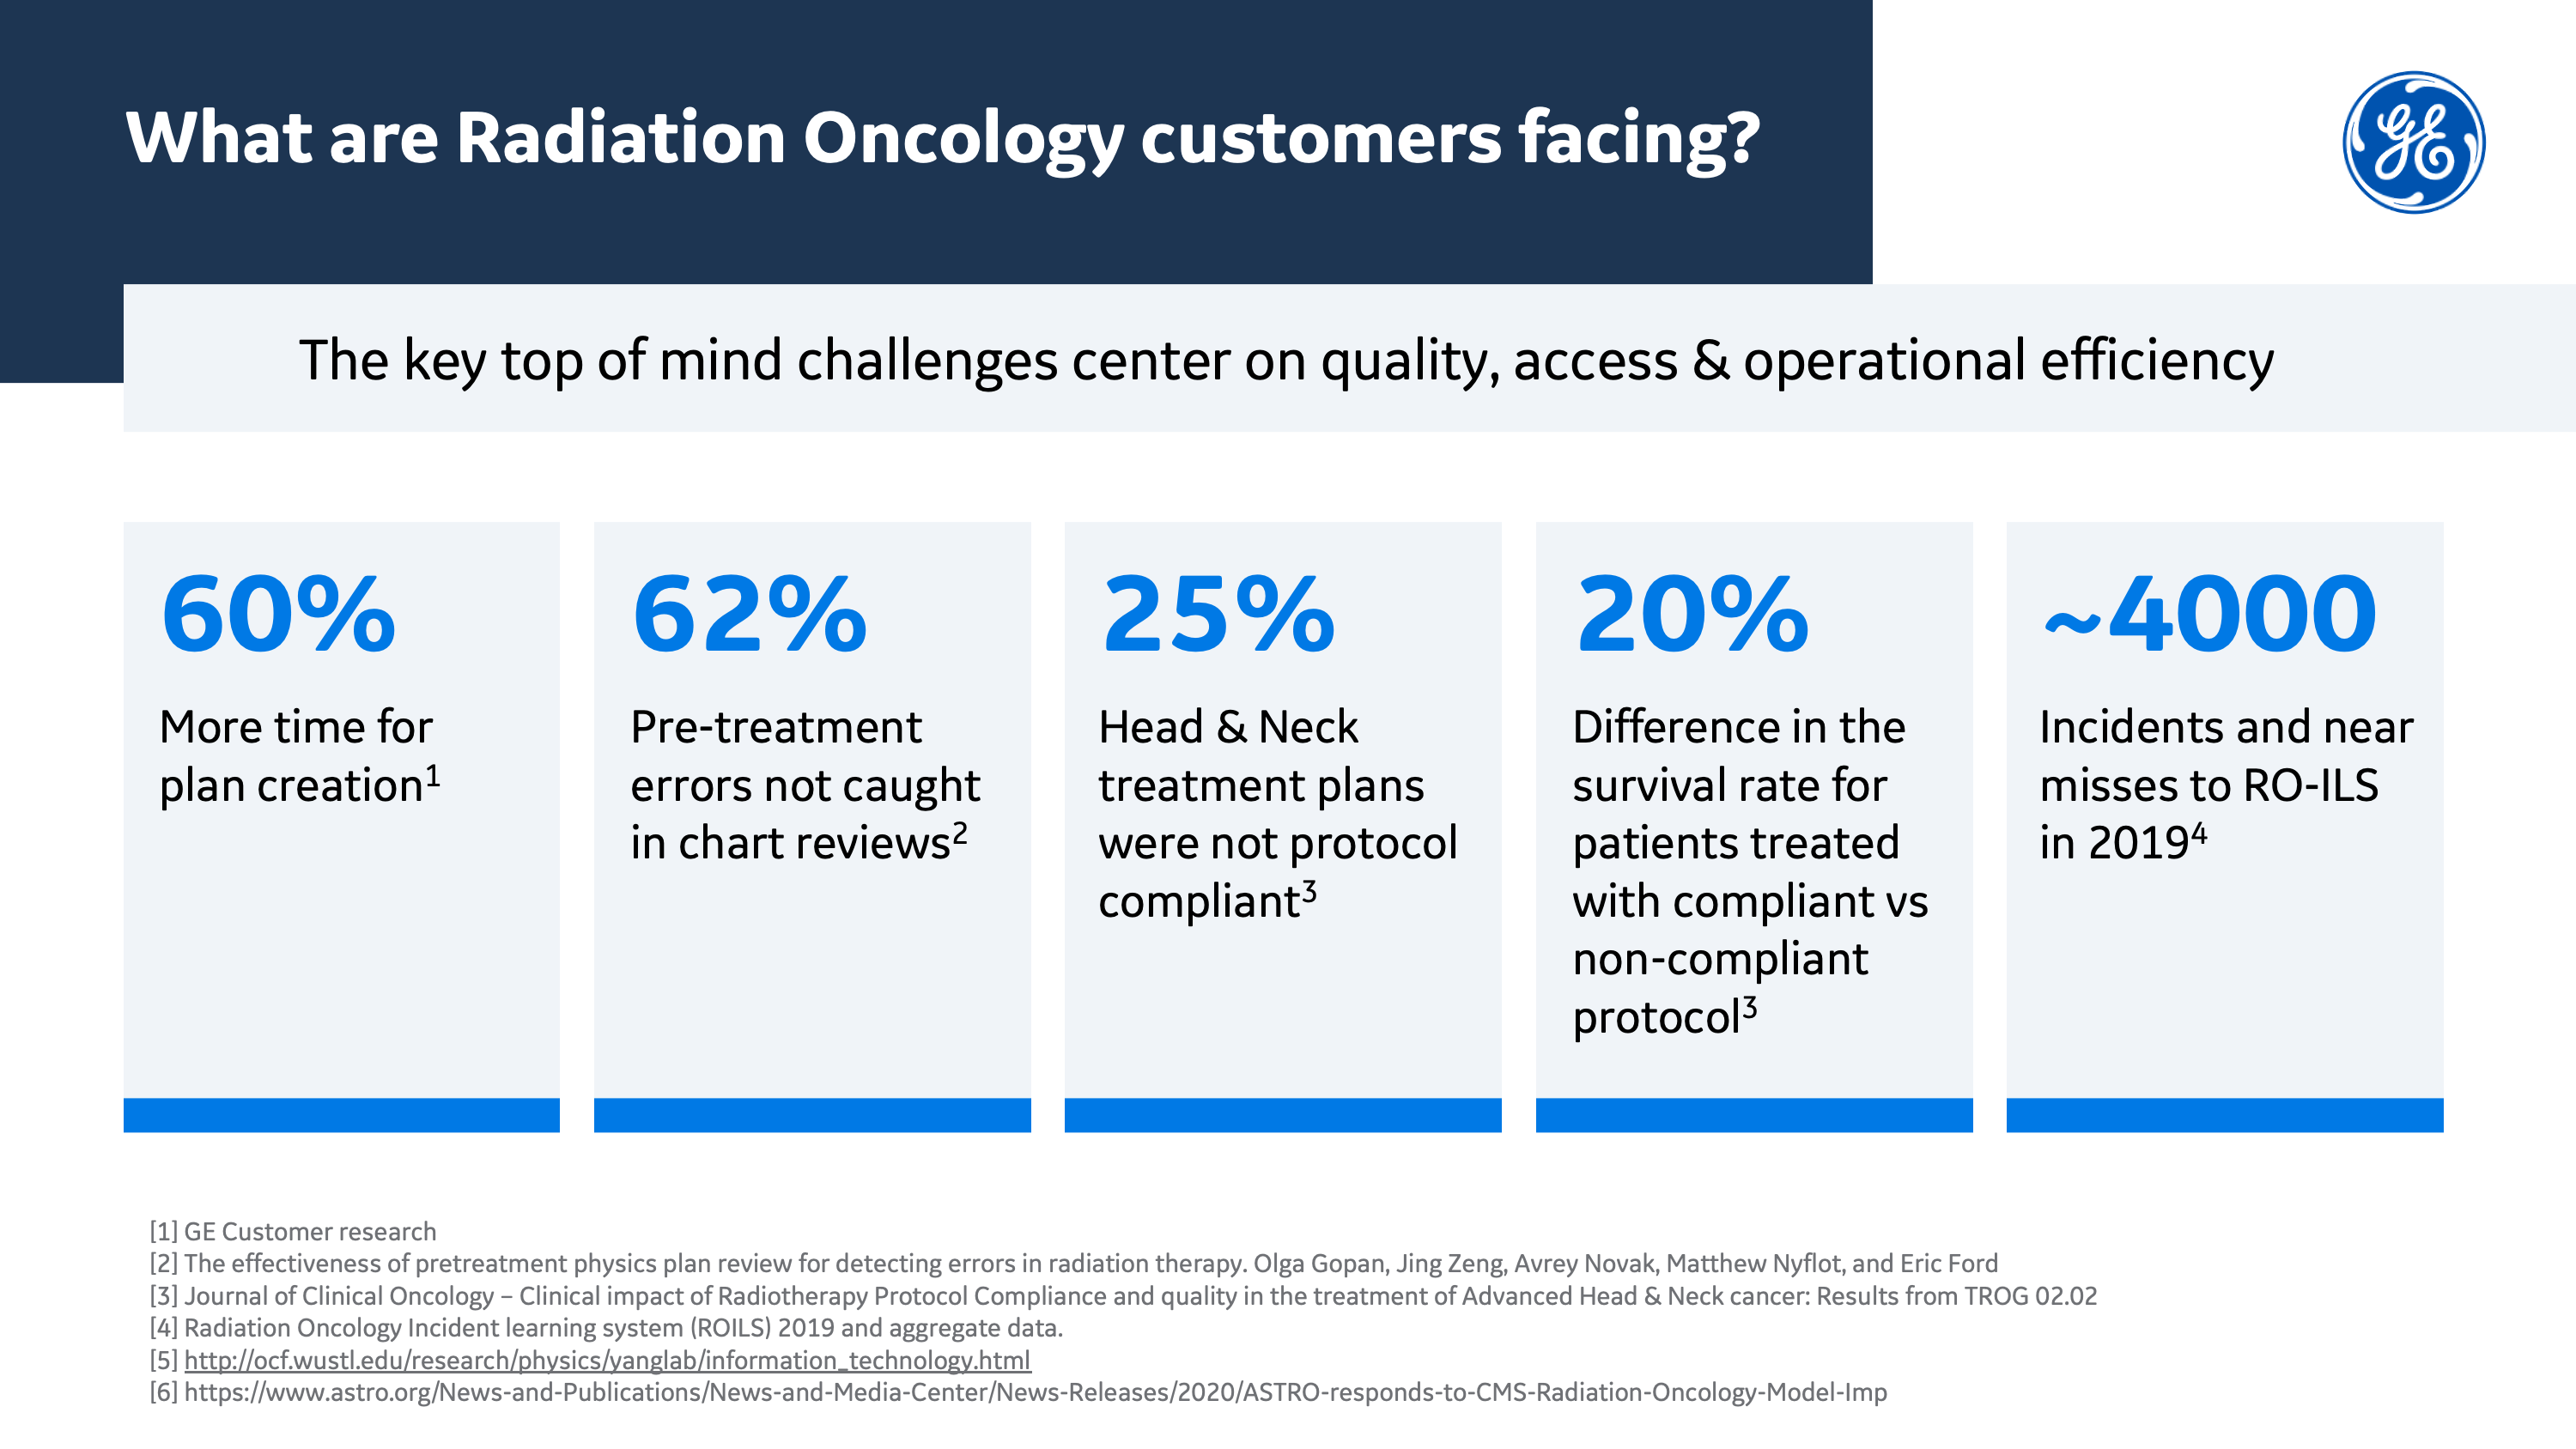 What are Radiation Oncology Customers Facing?